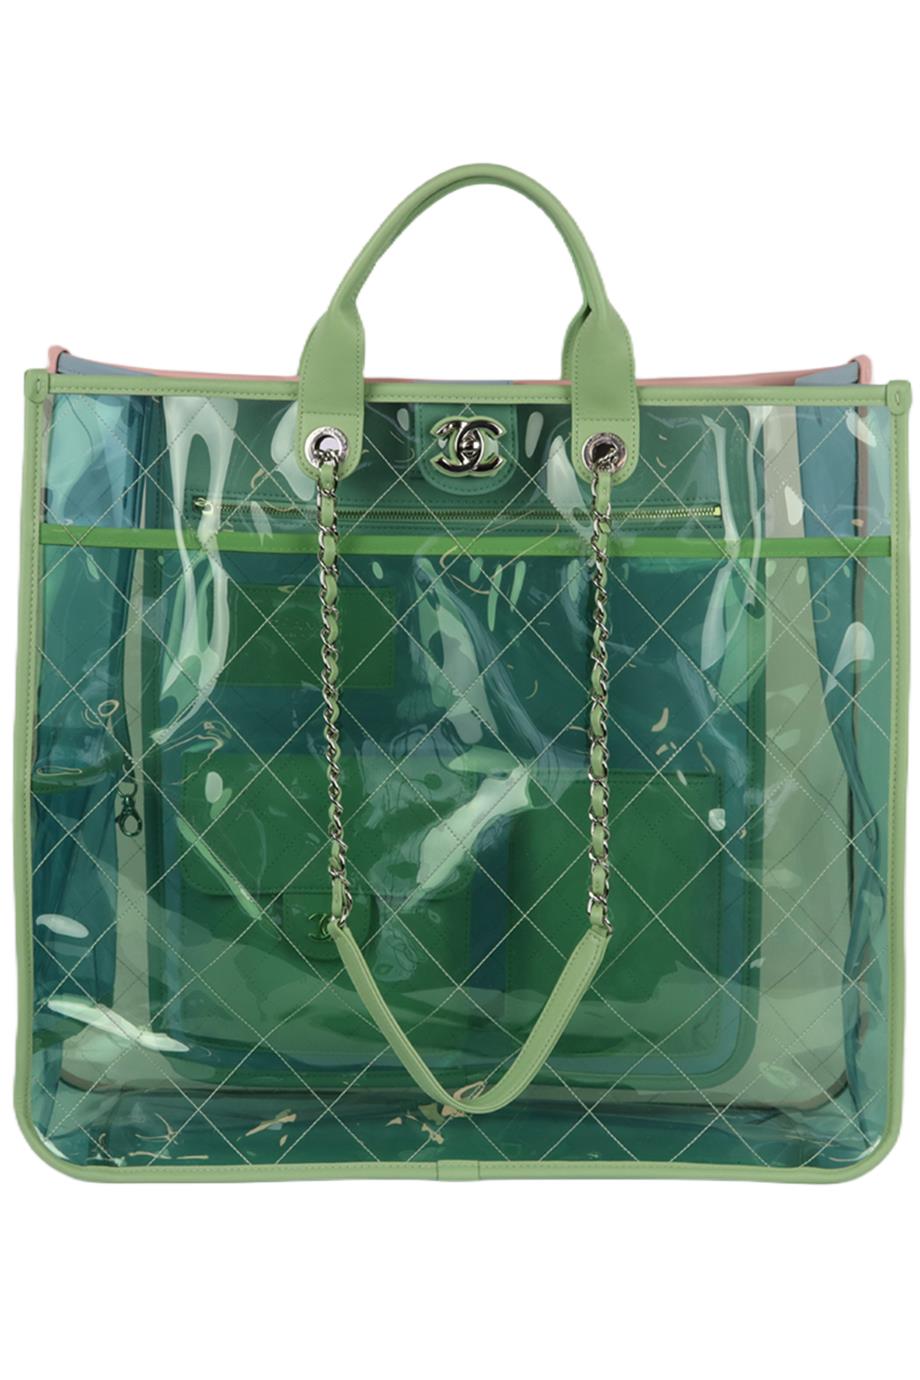 Chanel Forest Green Aged CC Shopping Tote Bag – The Closet